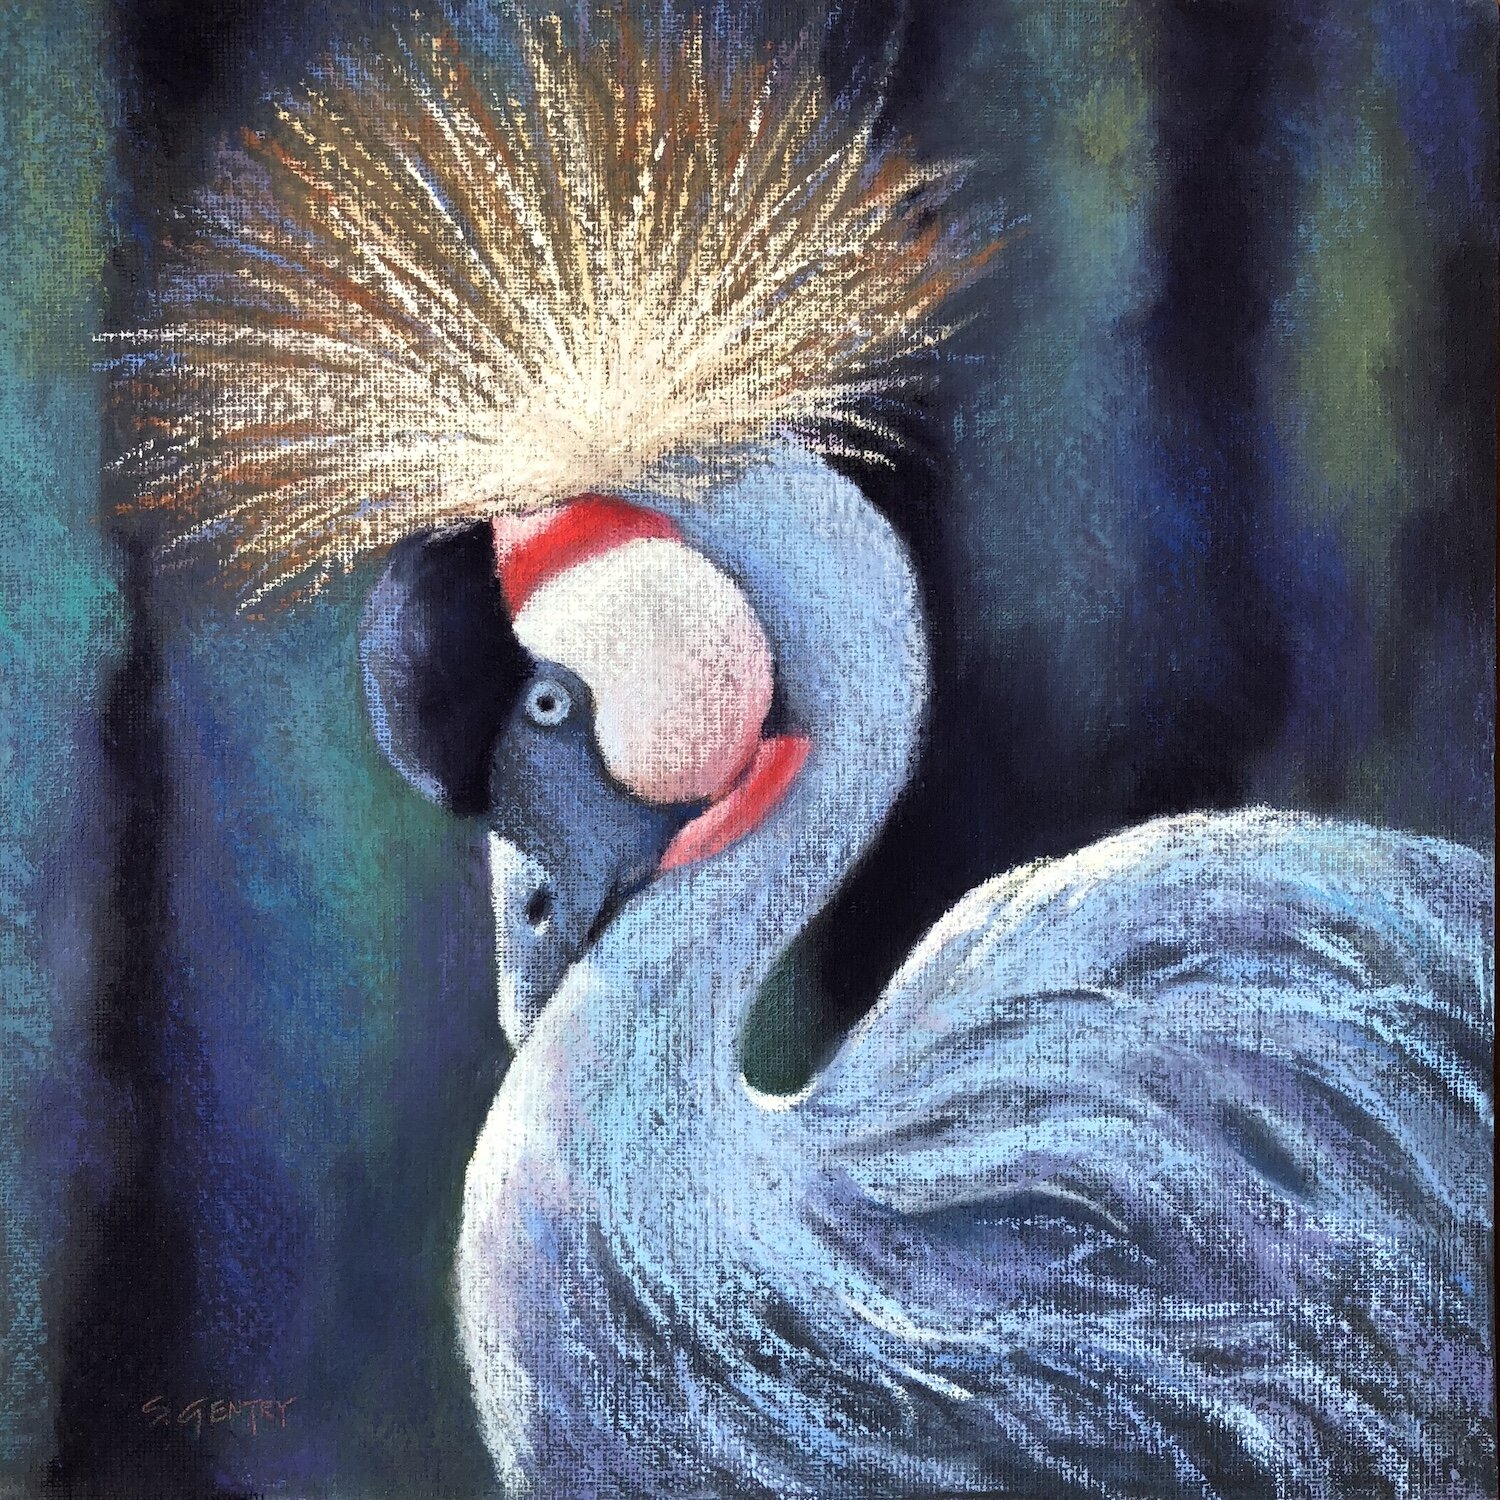    Long-Necked Beauty #1  , 18” x 18”, pastel on hand-textured board 